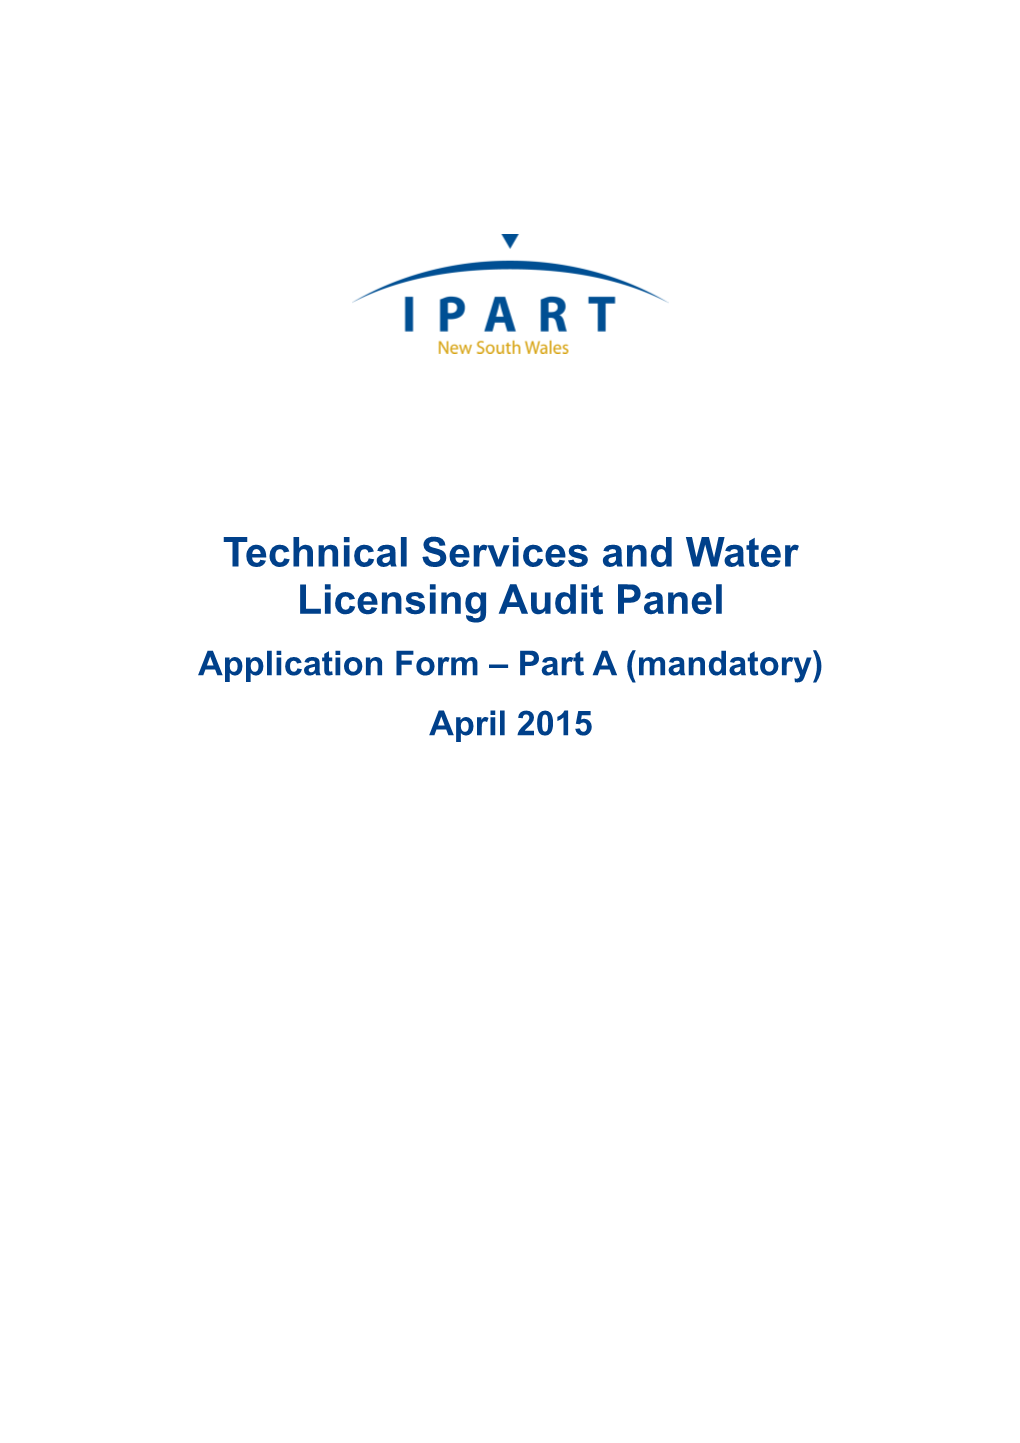 Technical Services and Water Licensing Audit Panel